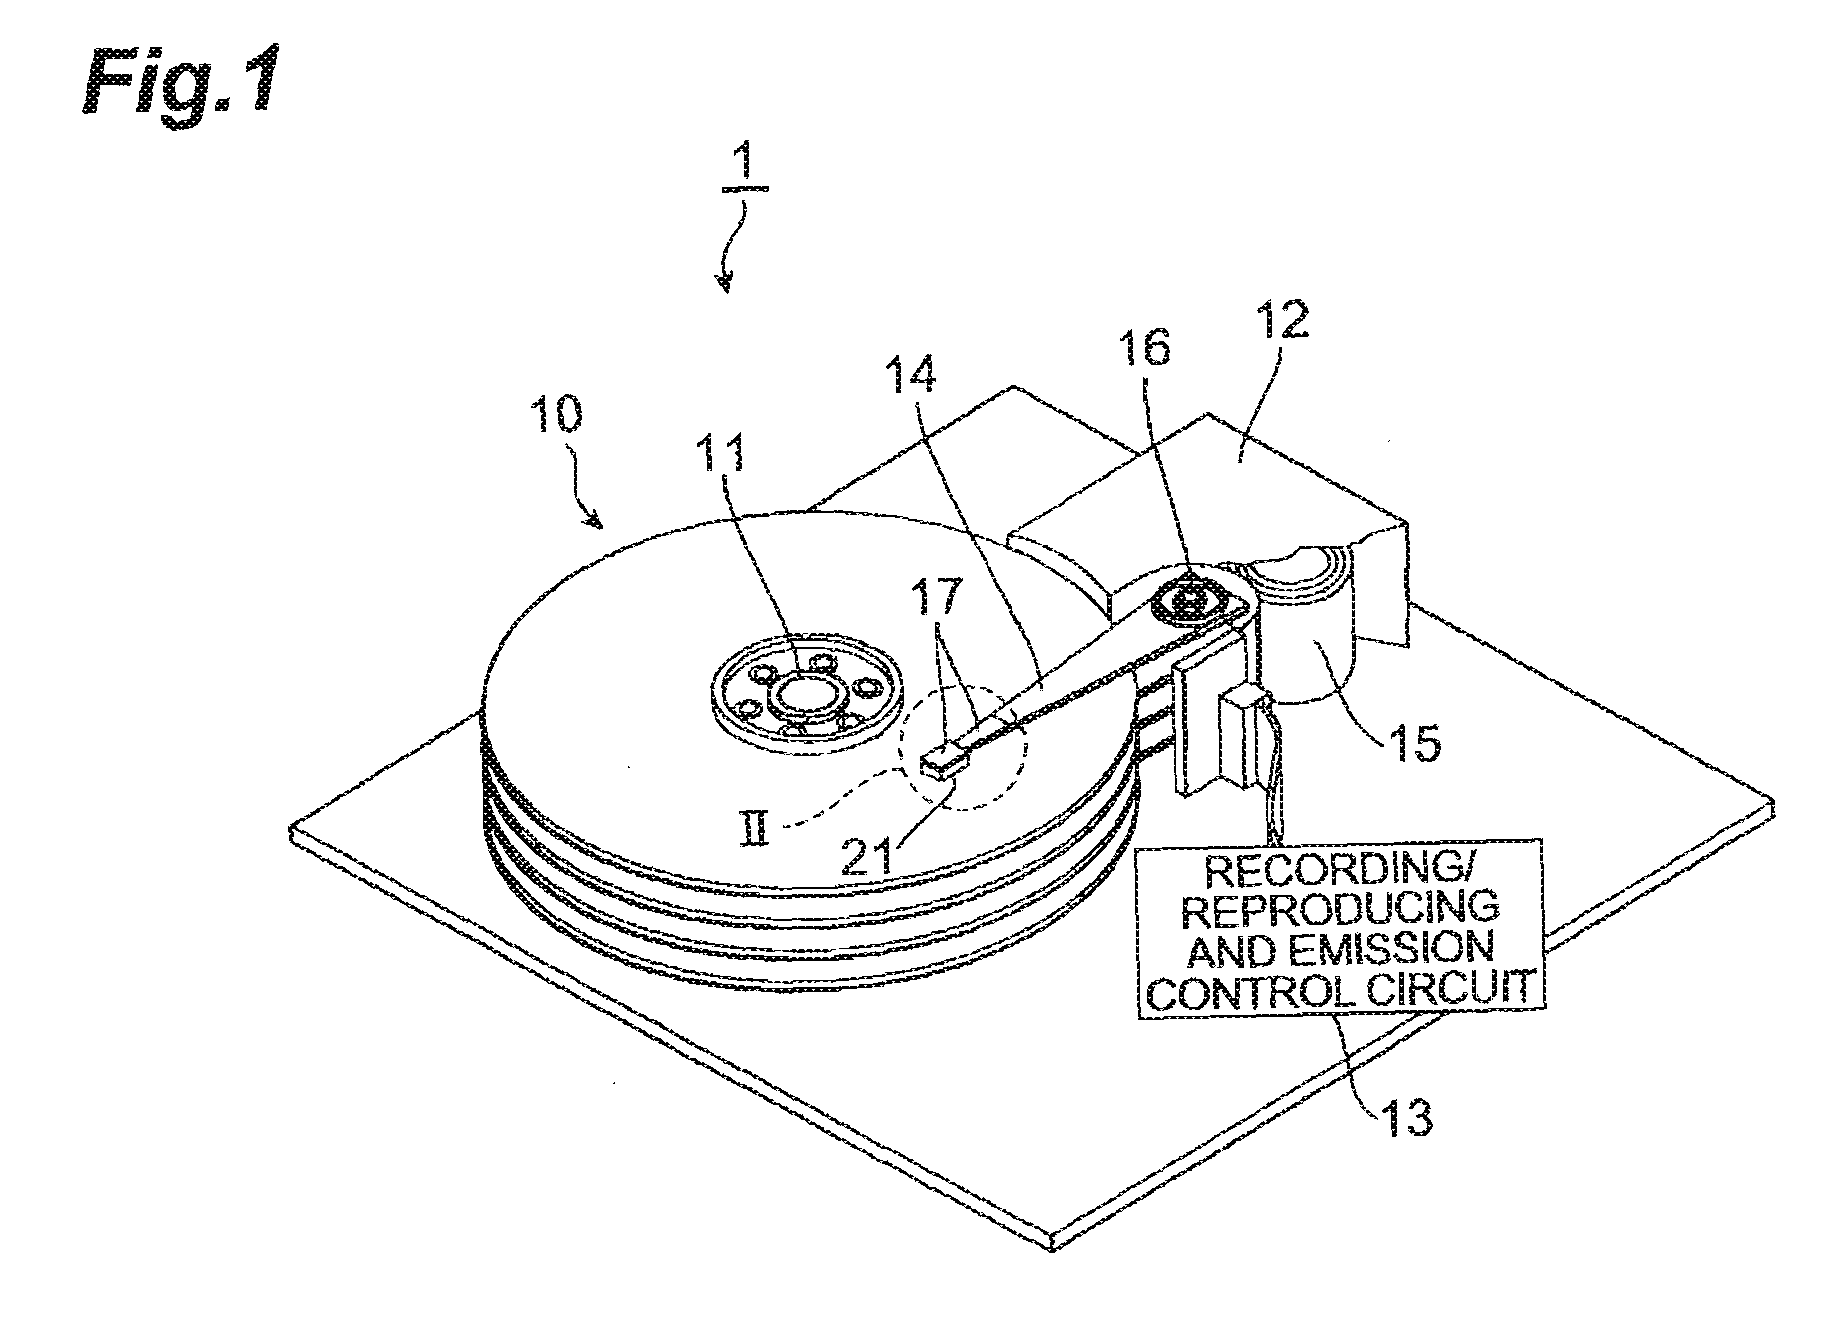 Thermally assisted magnetic head, head gimbal assembly, and hard disk drive